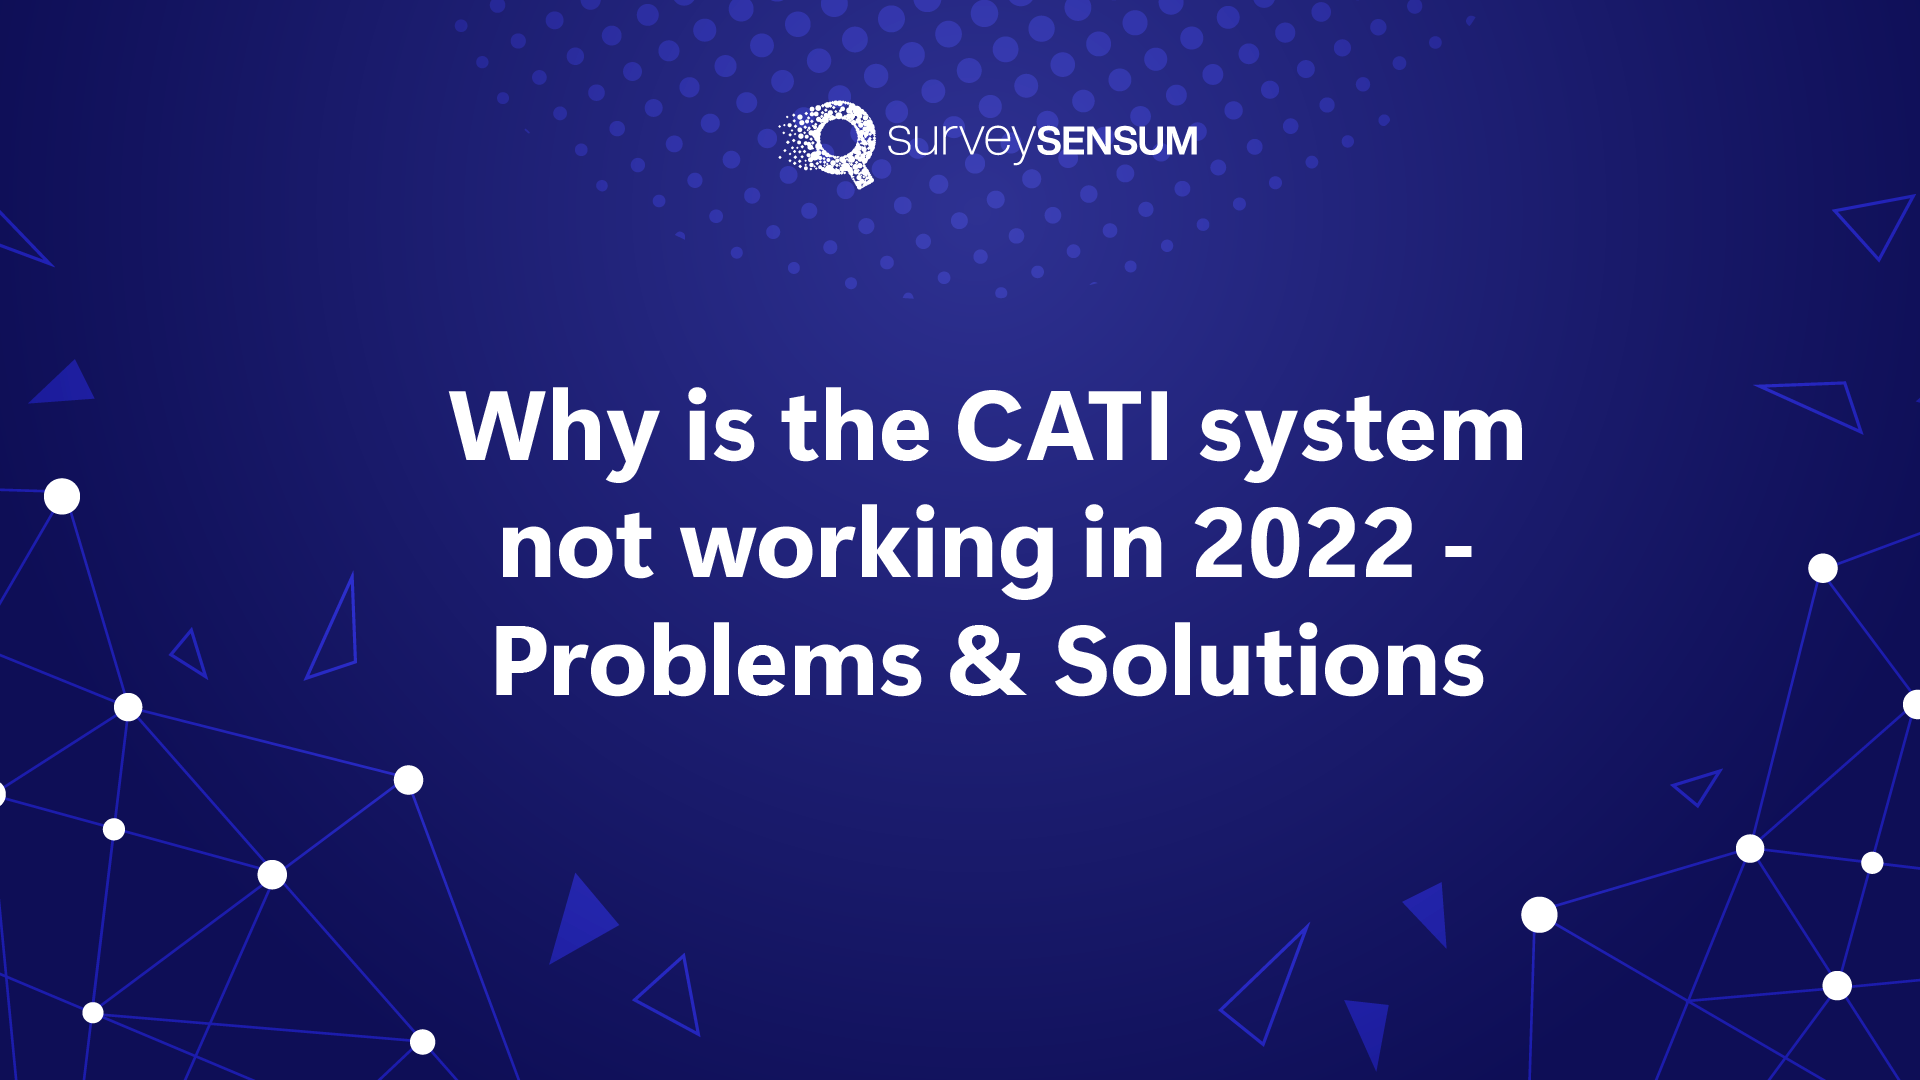 Why is the CATI System no more working in 2022: What is the solution?